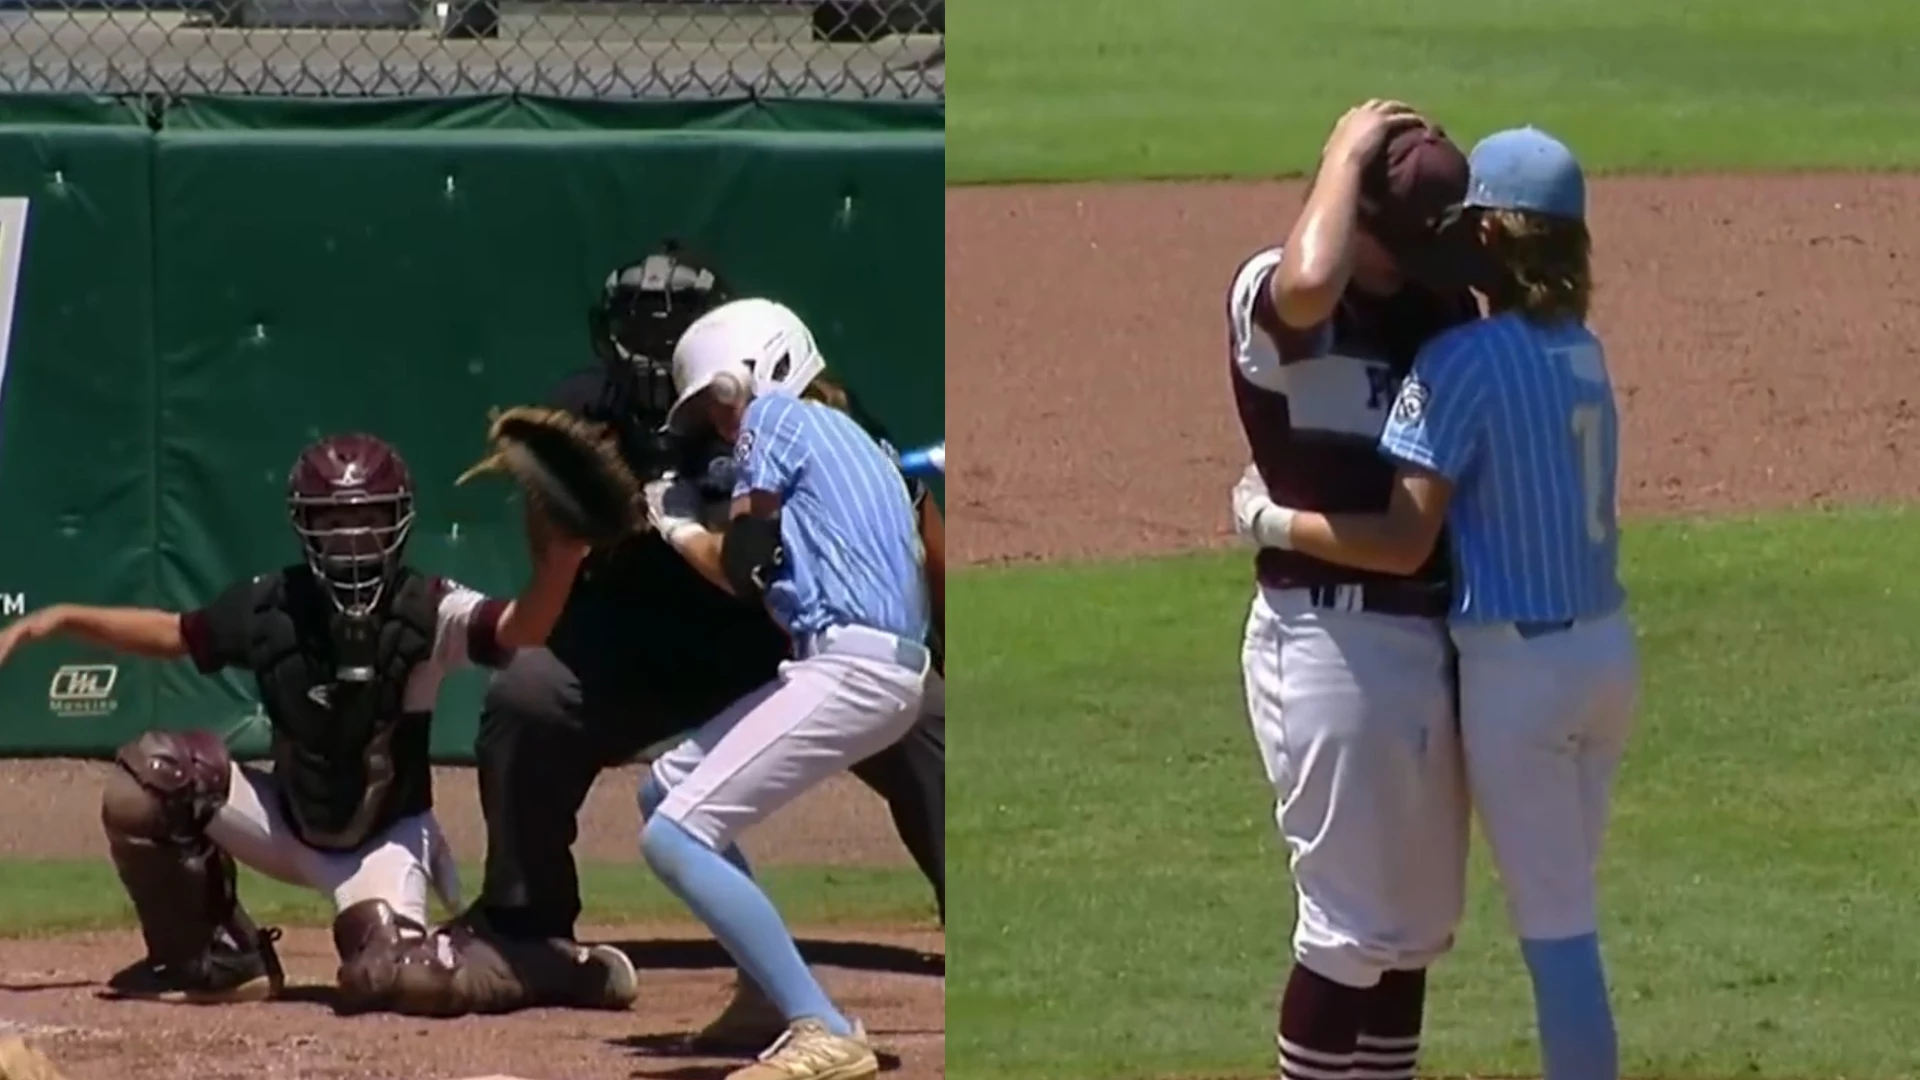 Midwest Little Leaguer Hit by Pitch Gets Up, Comforts Pitcher